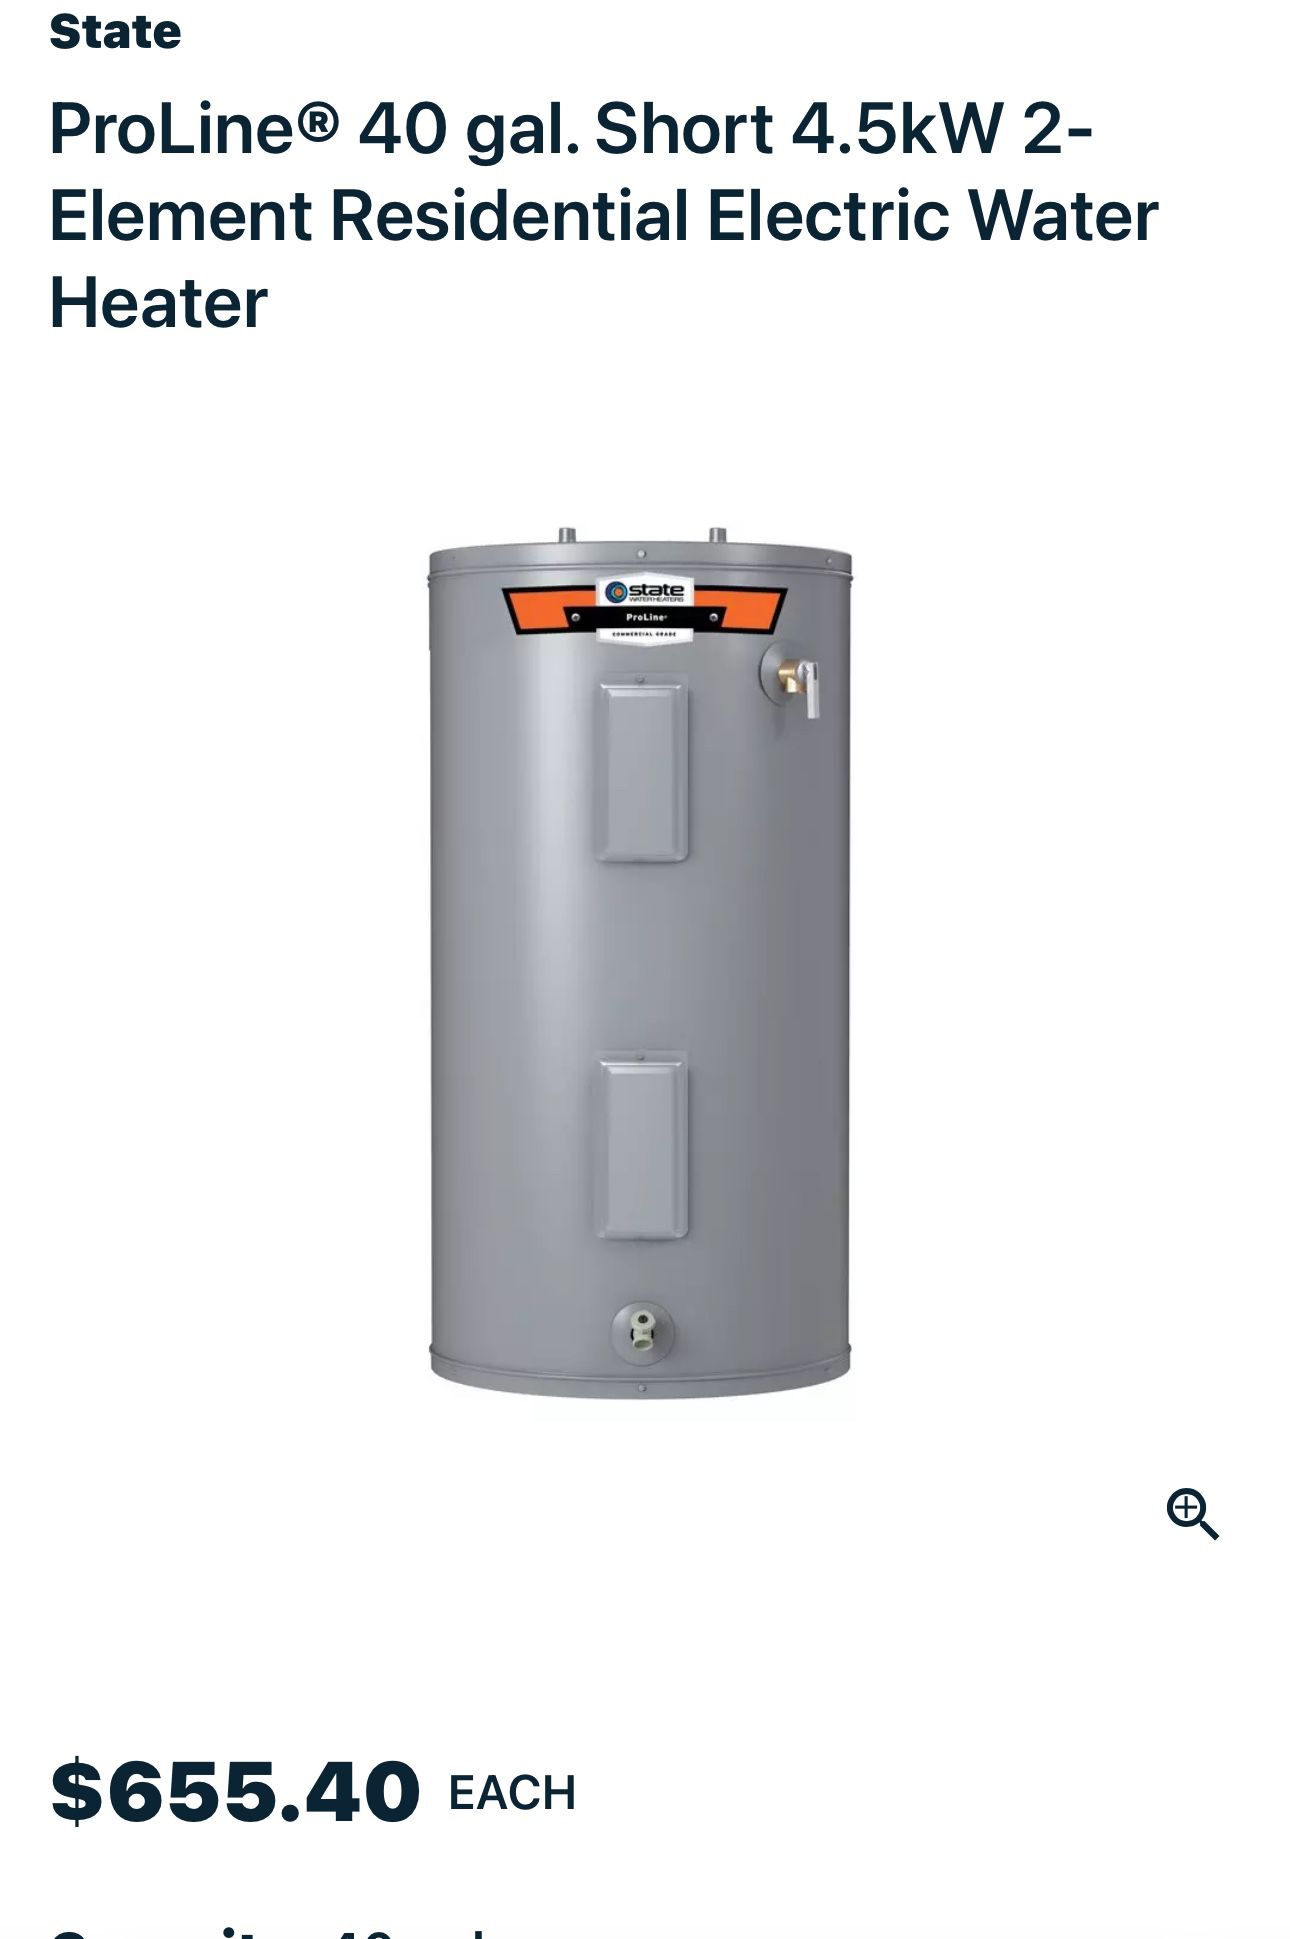 State Proline 40 Gallon Short Electric Water Heater 